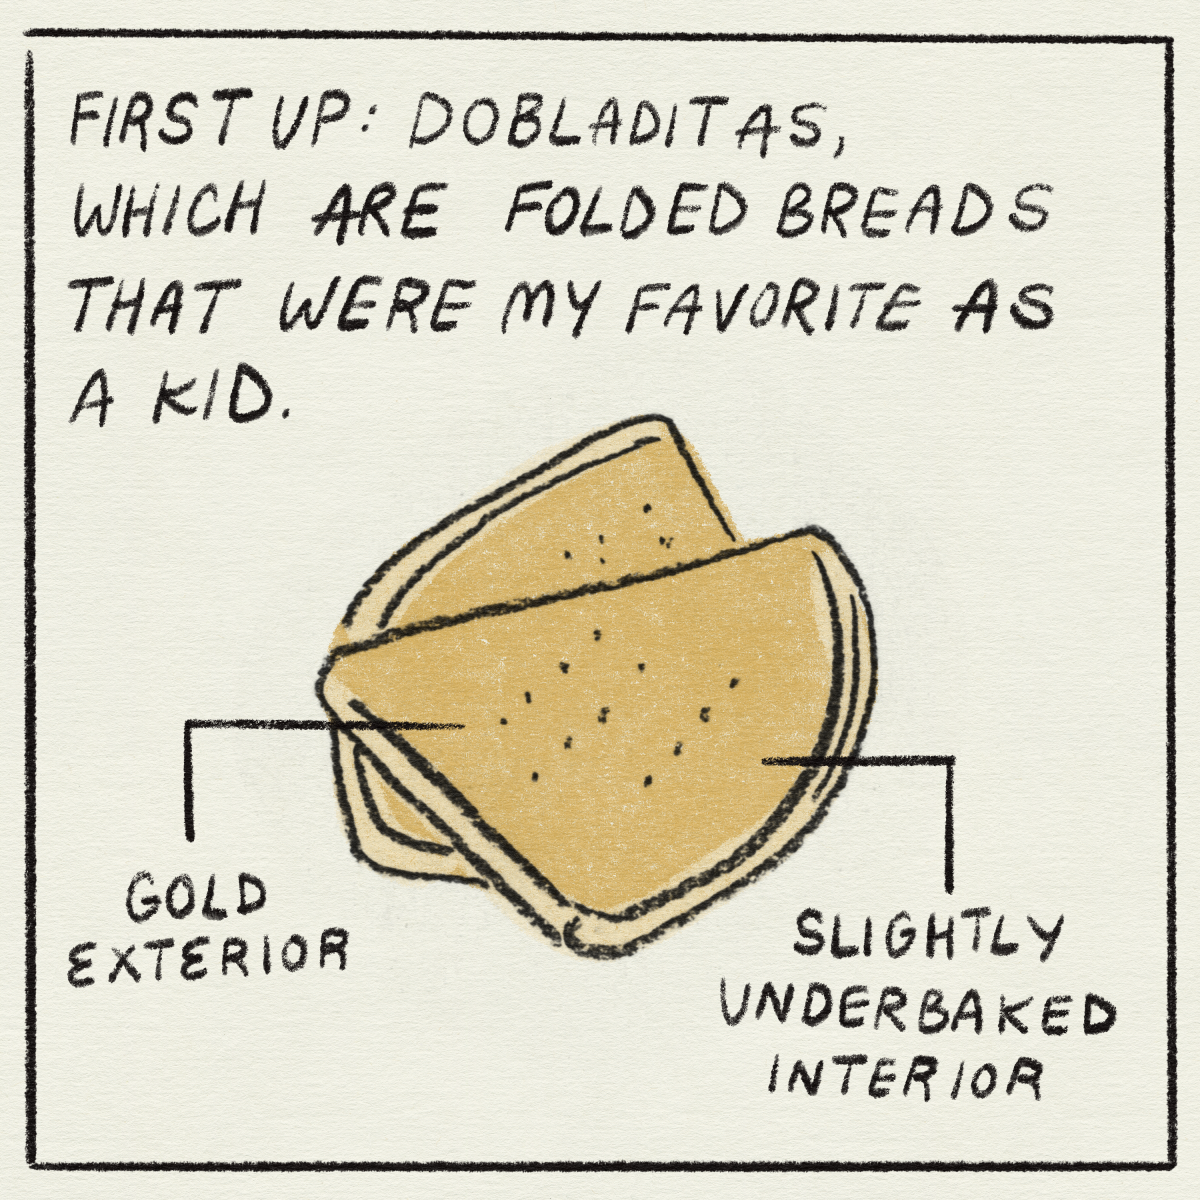 "First up: Dobladitas, which are folded breads that were my favorite as a kid.""Gold exterior, slightly underbaked interior."